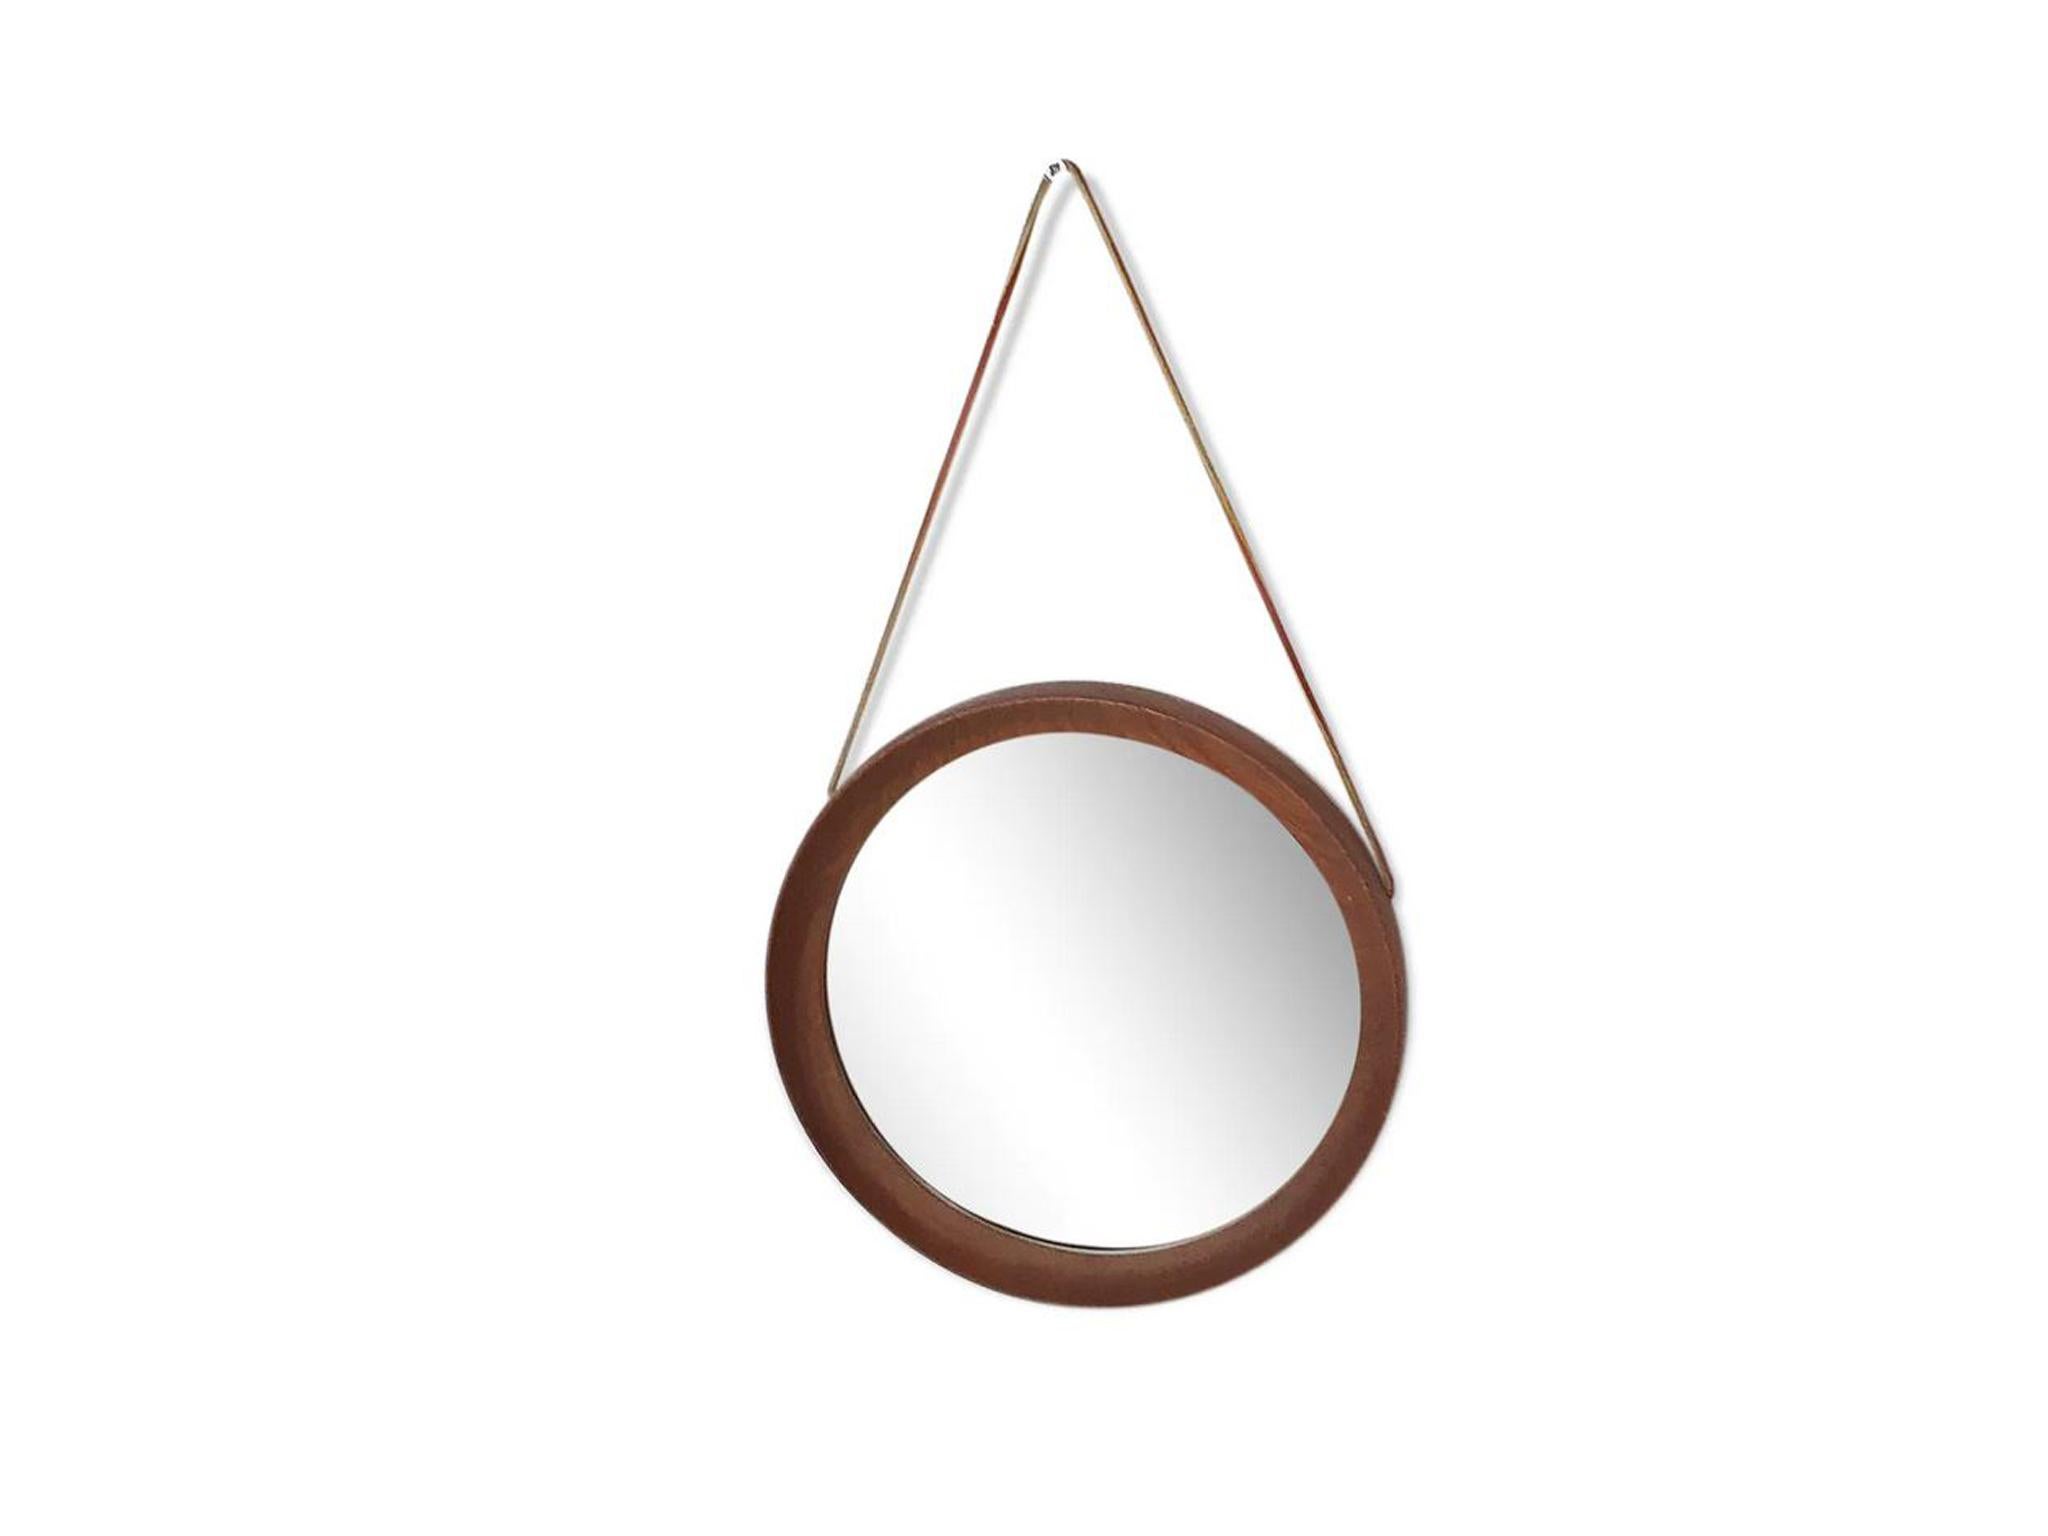 Round teak mirror with a new leather strap.